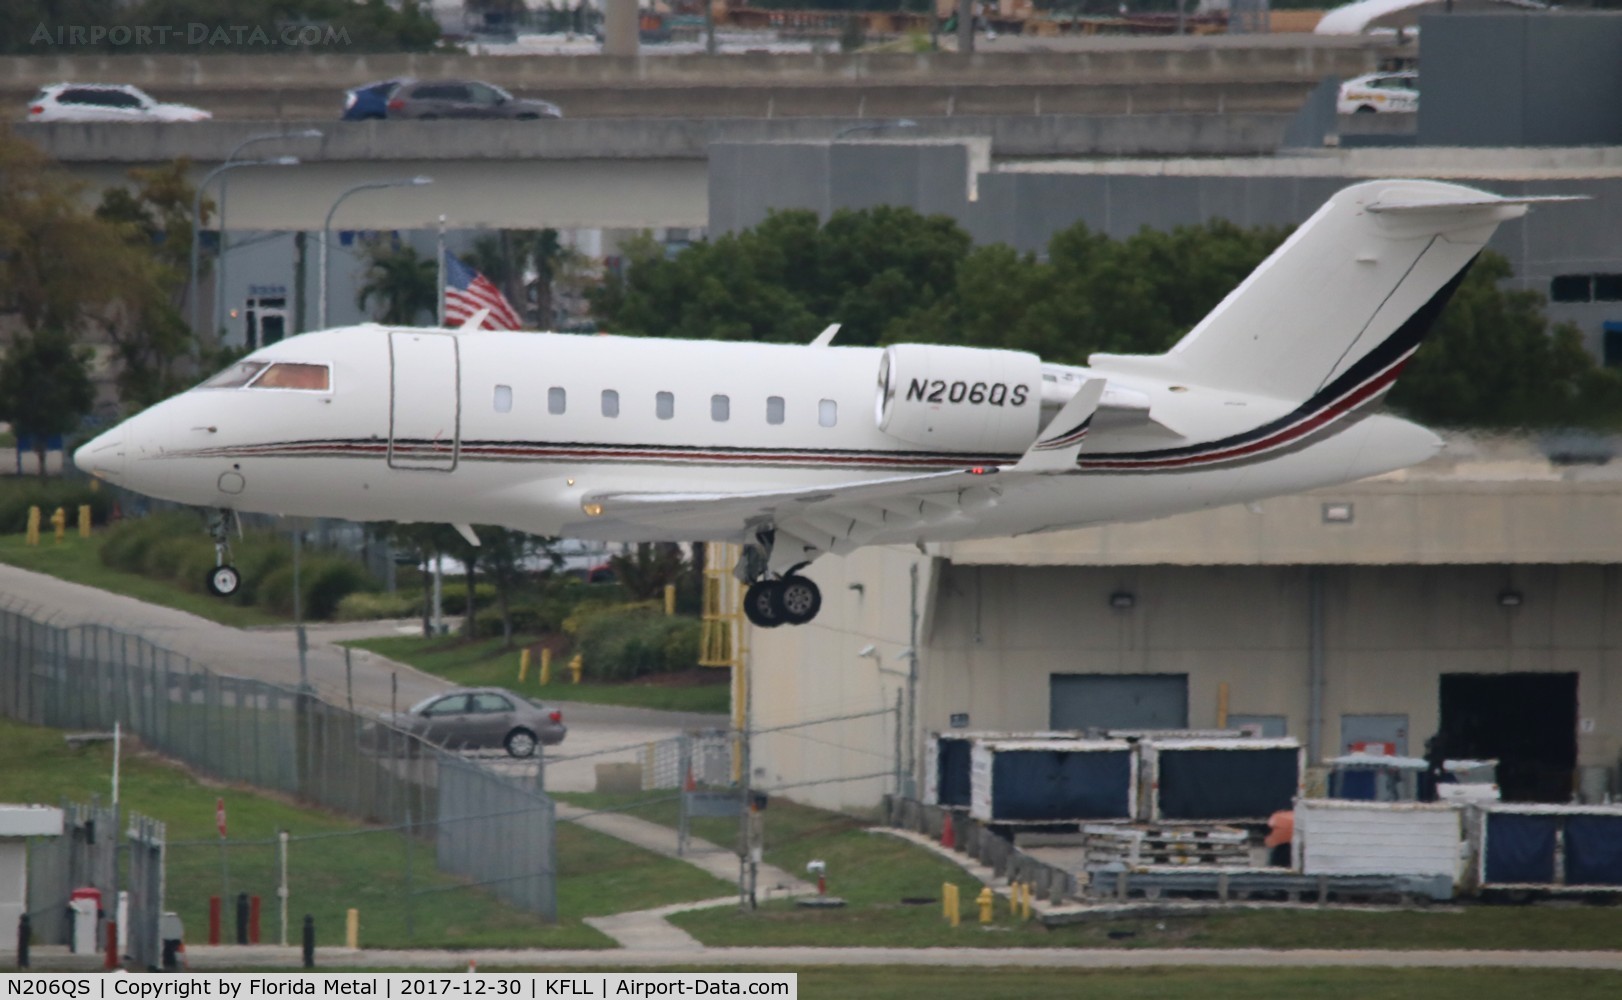 N206QS, 2015 Bombardier Challenger 650 (CL-600-2B16) C/N 6055, Challenger 650 zx